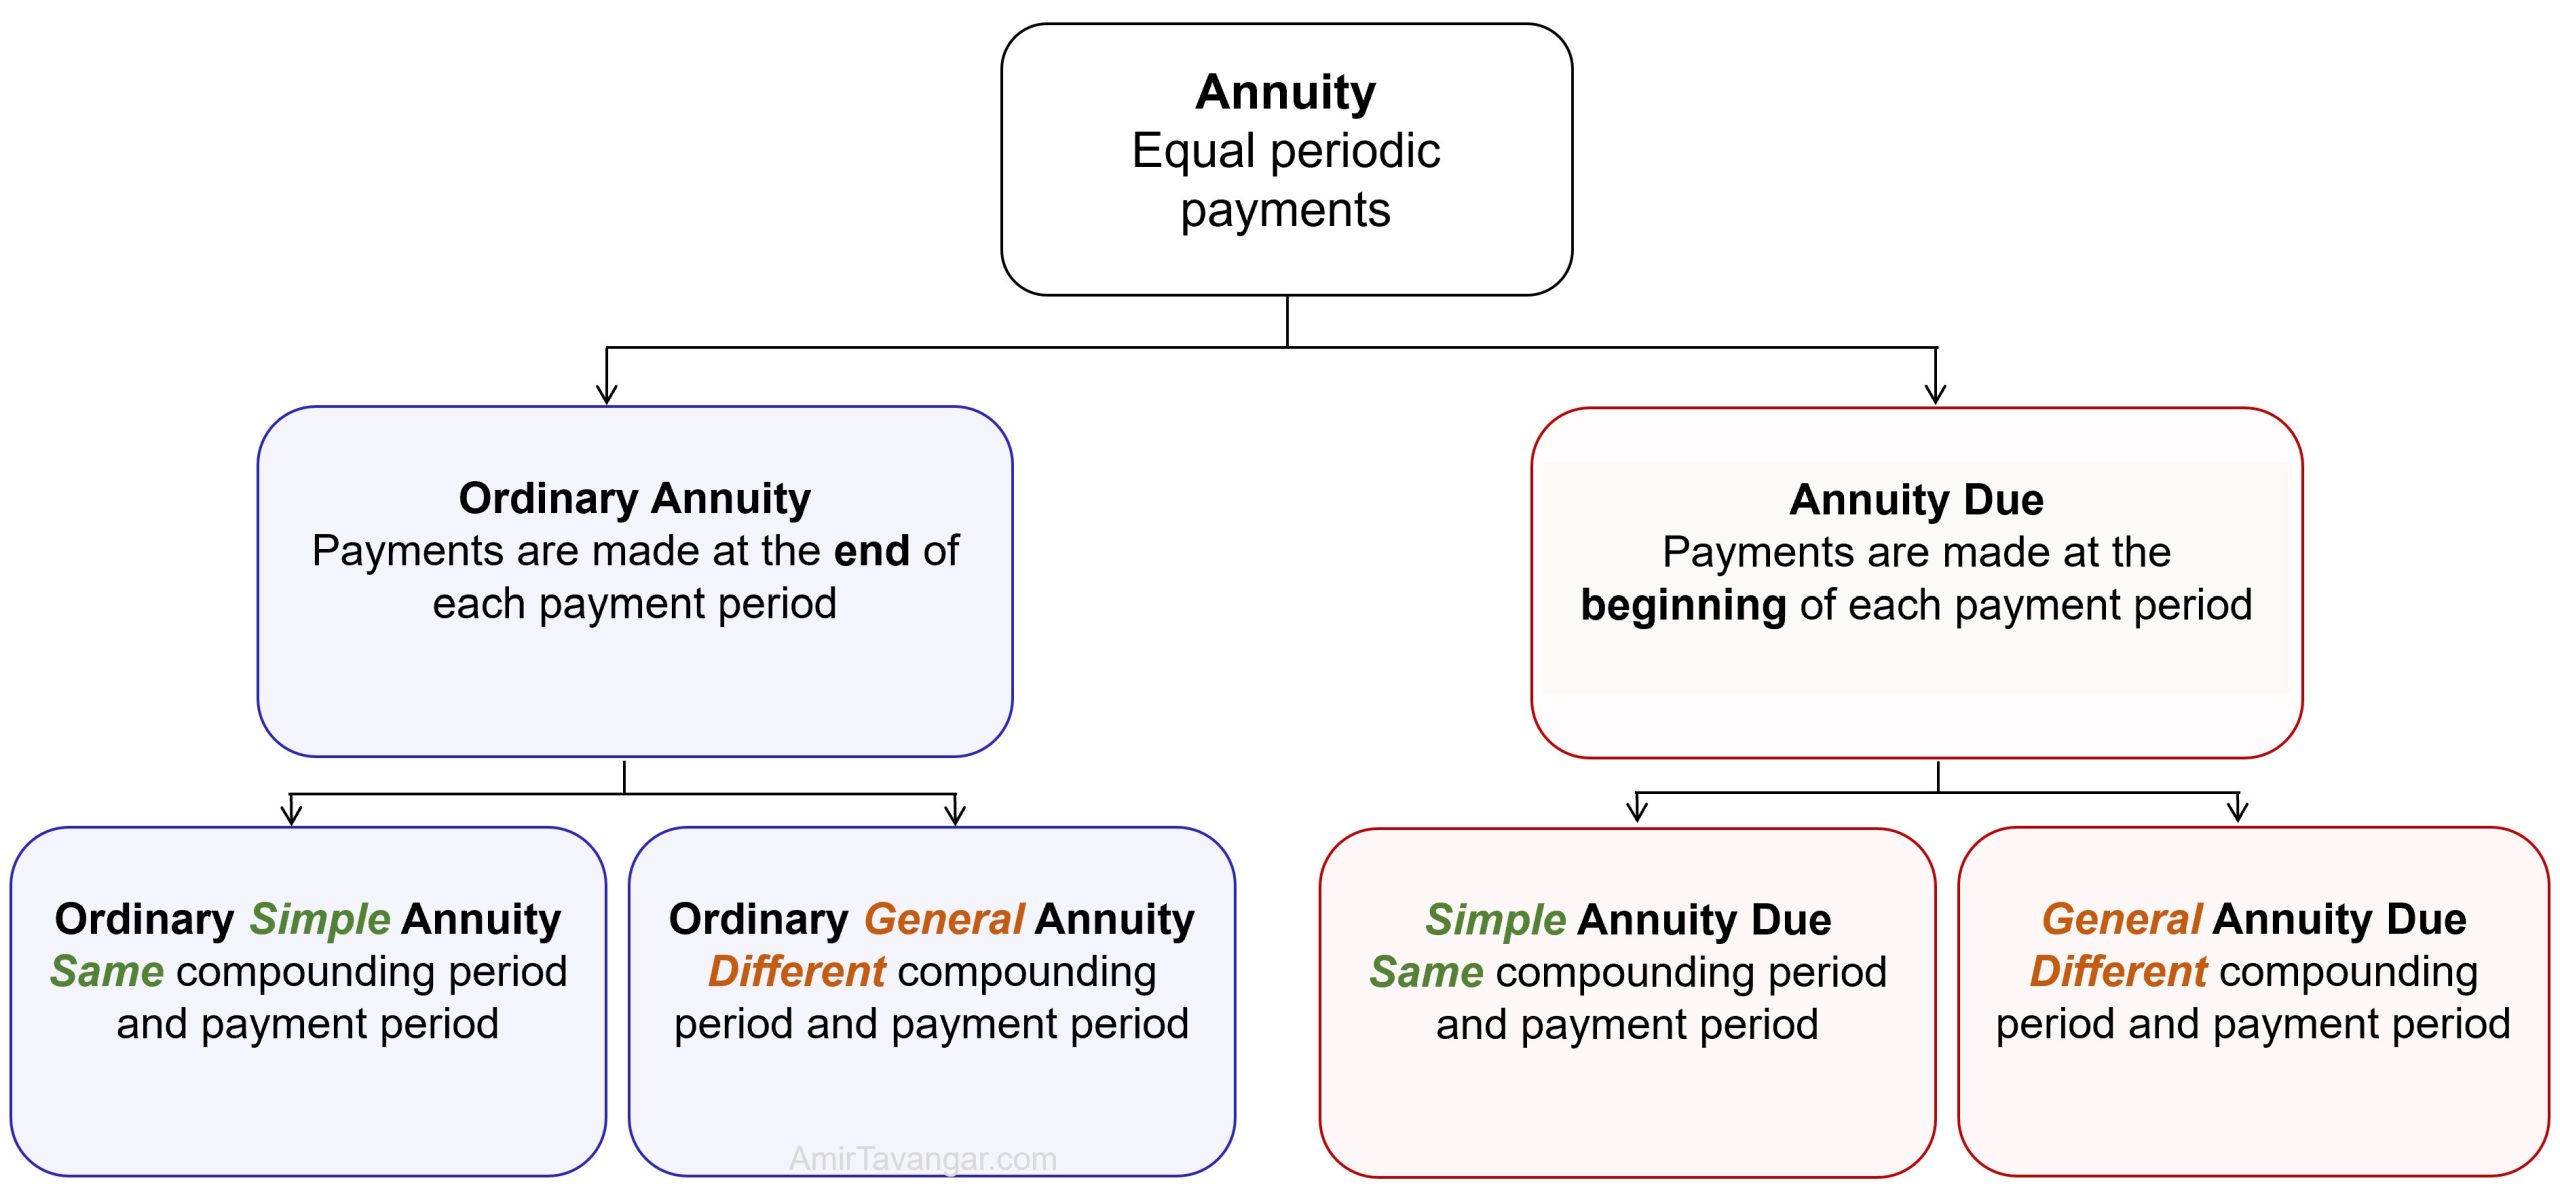 A diagram displaying different types of annuities including ordinary annuity and annuity due, both of which further divide into simple or general annuities. That leads to four types of annuities: ordinary simple annuity, ordinary general annuity, simple annuity due, and general annuity due. 